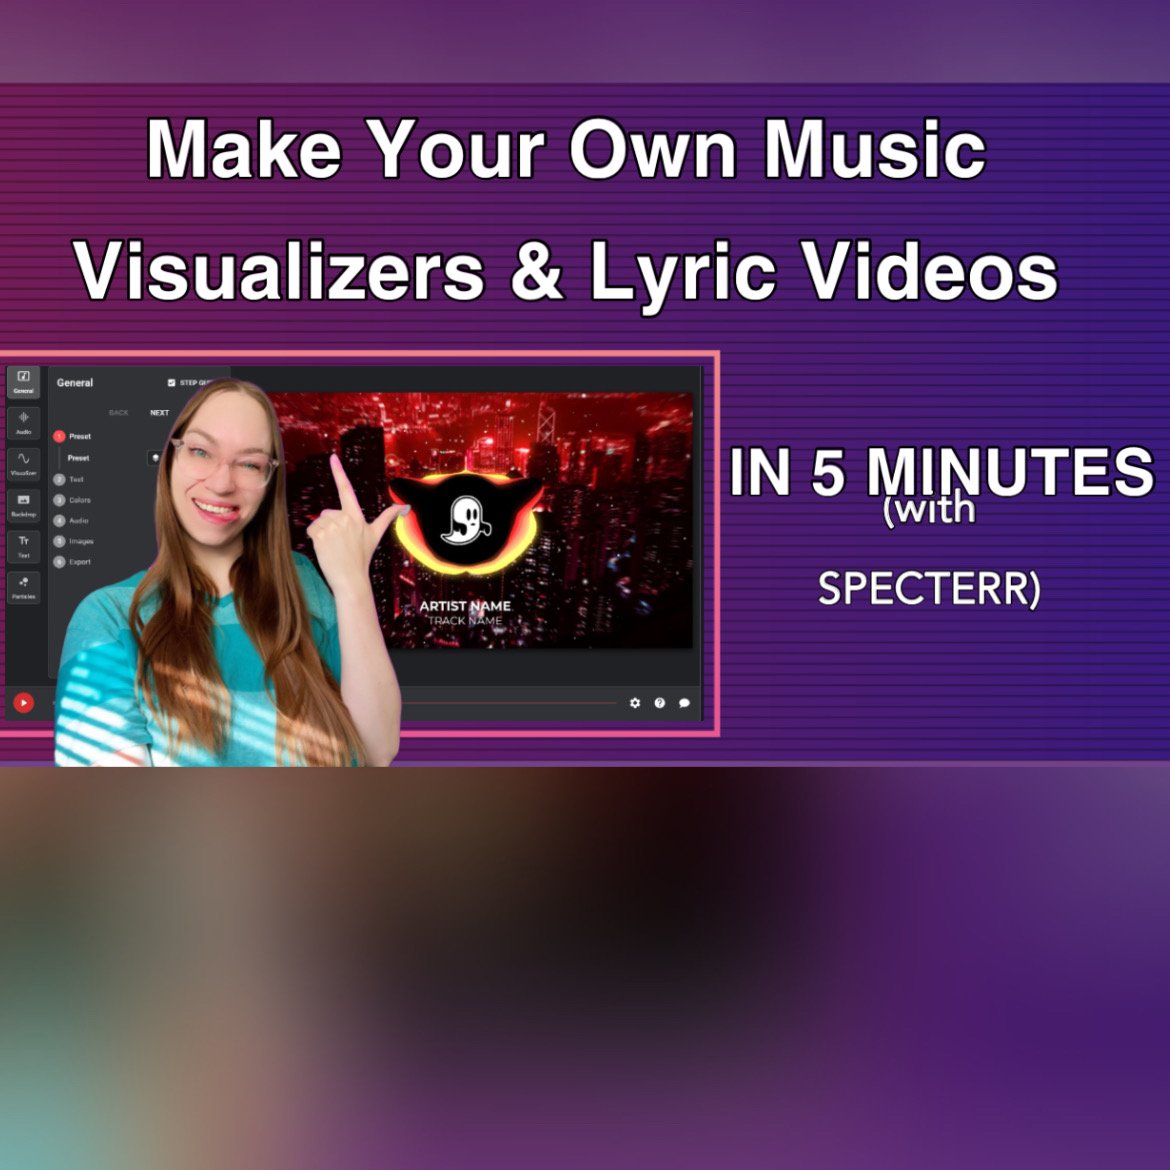 make your own music visualizers and lyric videos in five minutes with Specterr